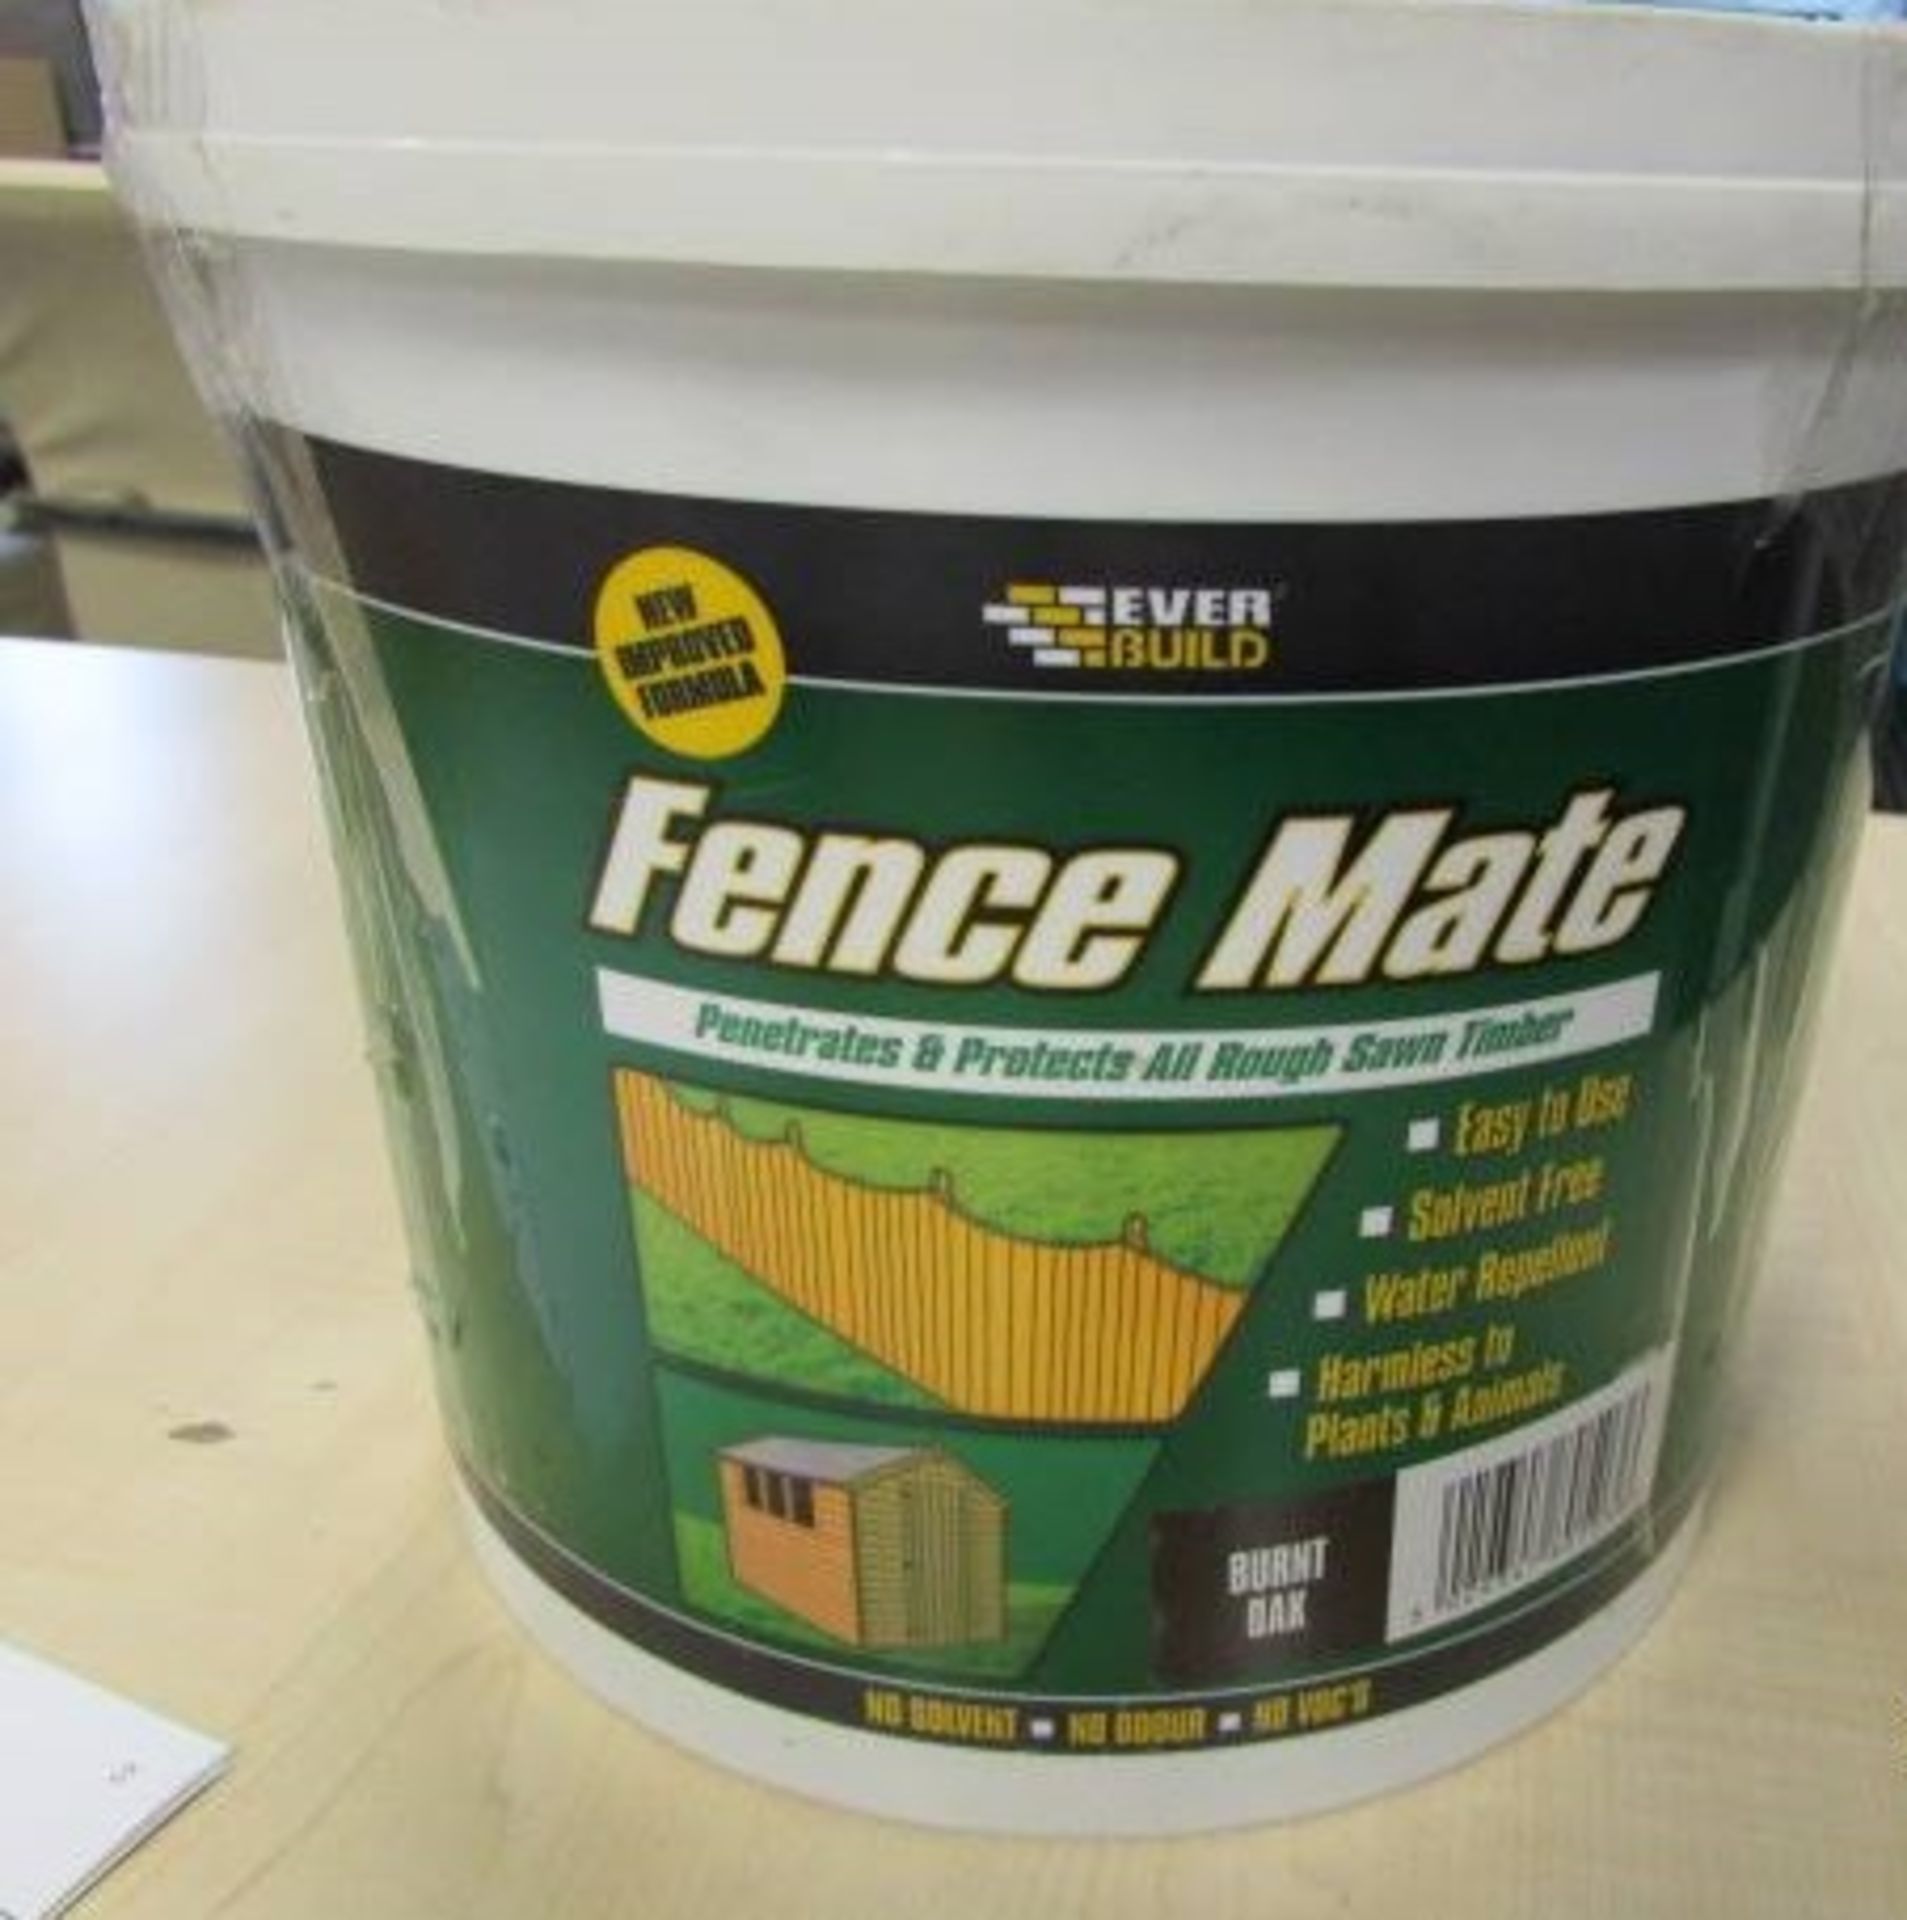 50 x Shed & Fence Mate (Mixed Colours, "Holly Green,Country Oak,Rustic Red,Burnt Oak" All 5L Tubs)